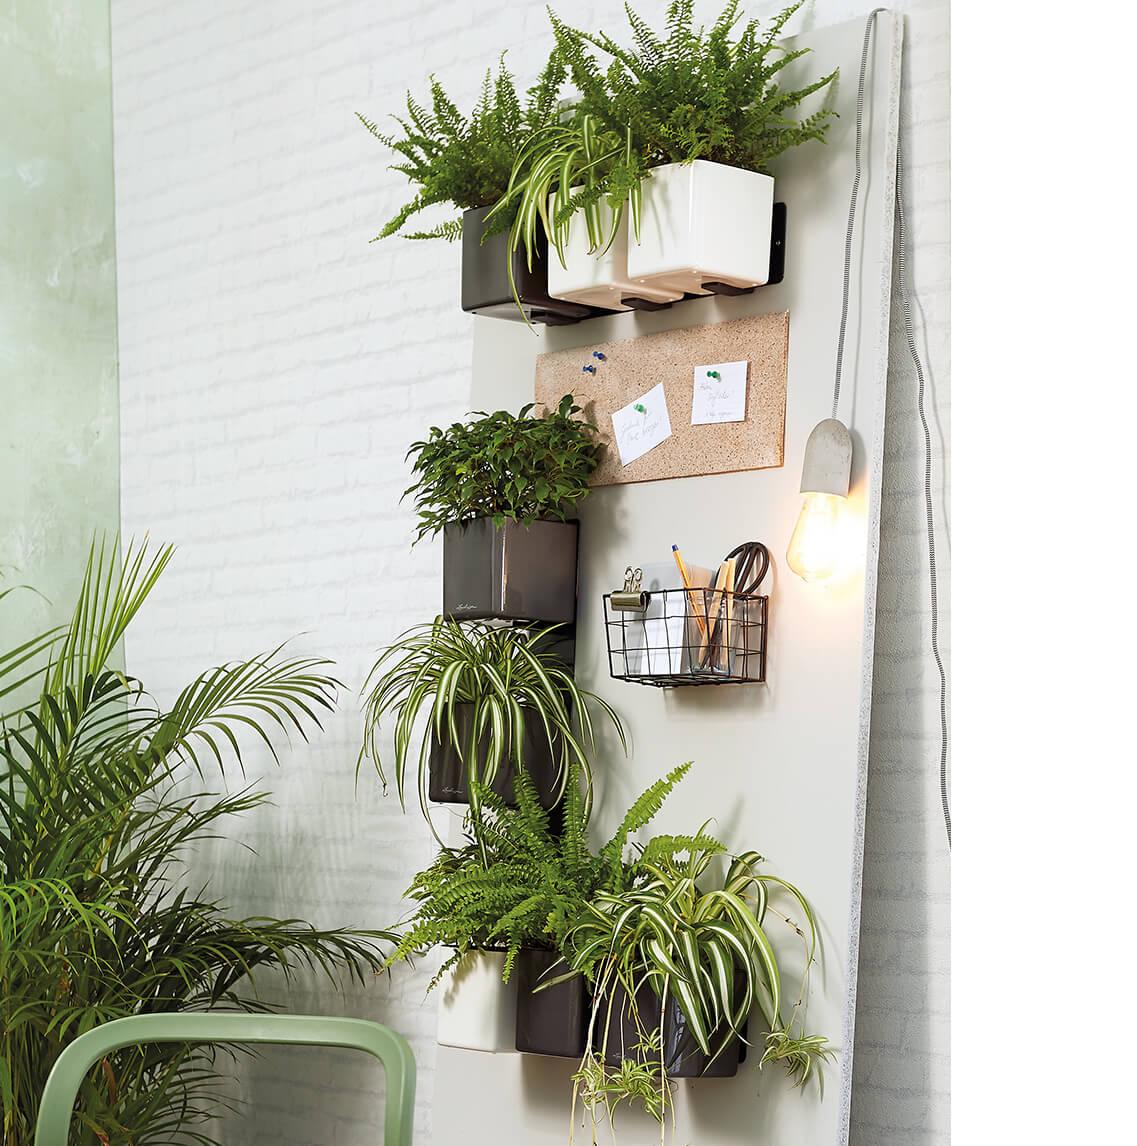 Several Green Wall Kits hang on one wall together with a pen holder and pin board